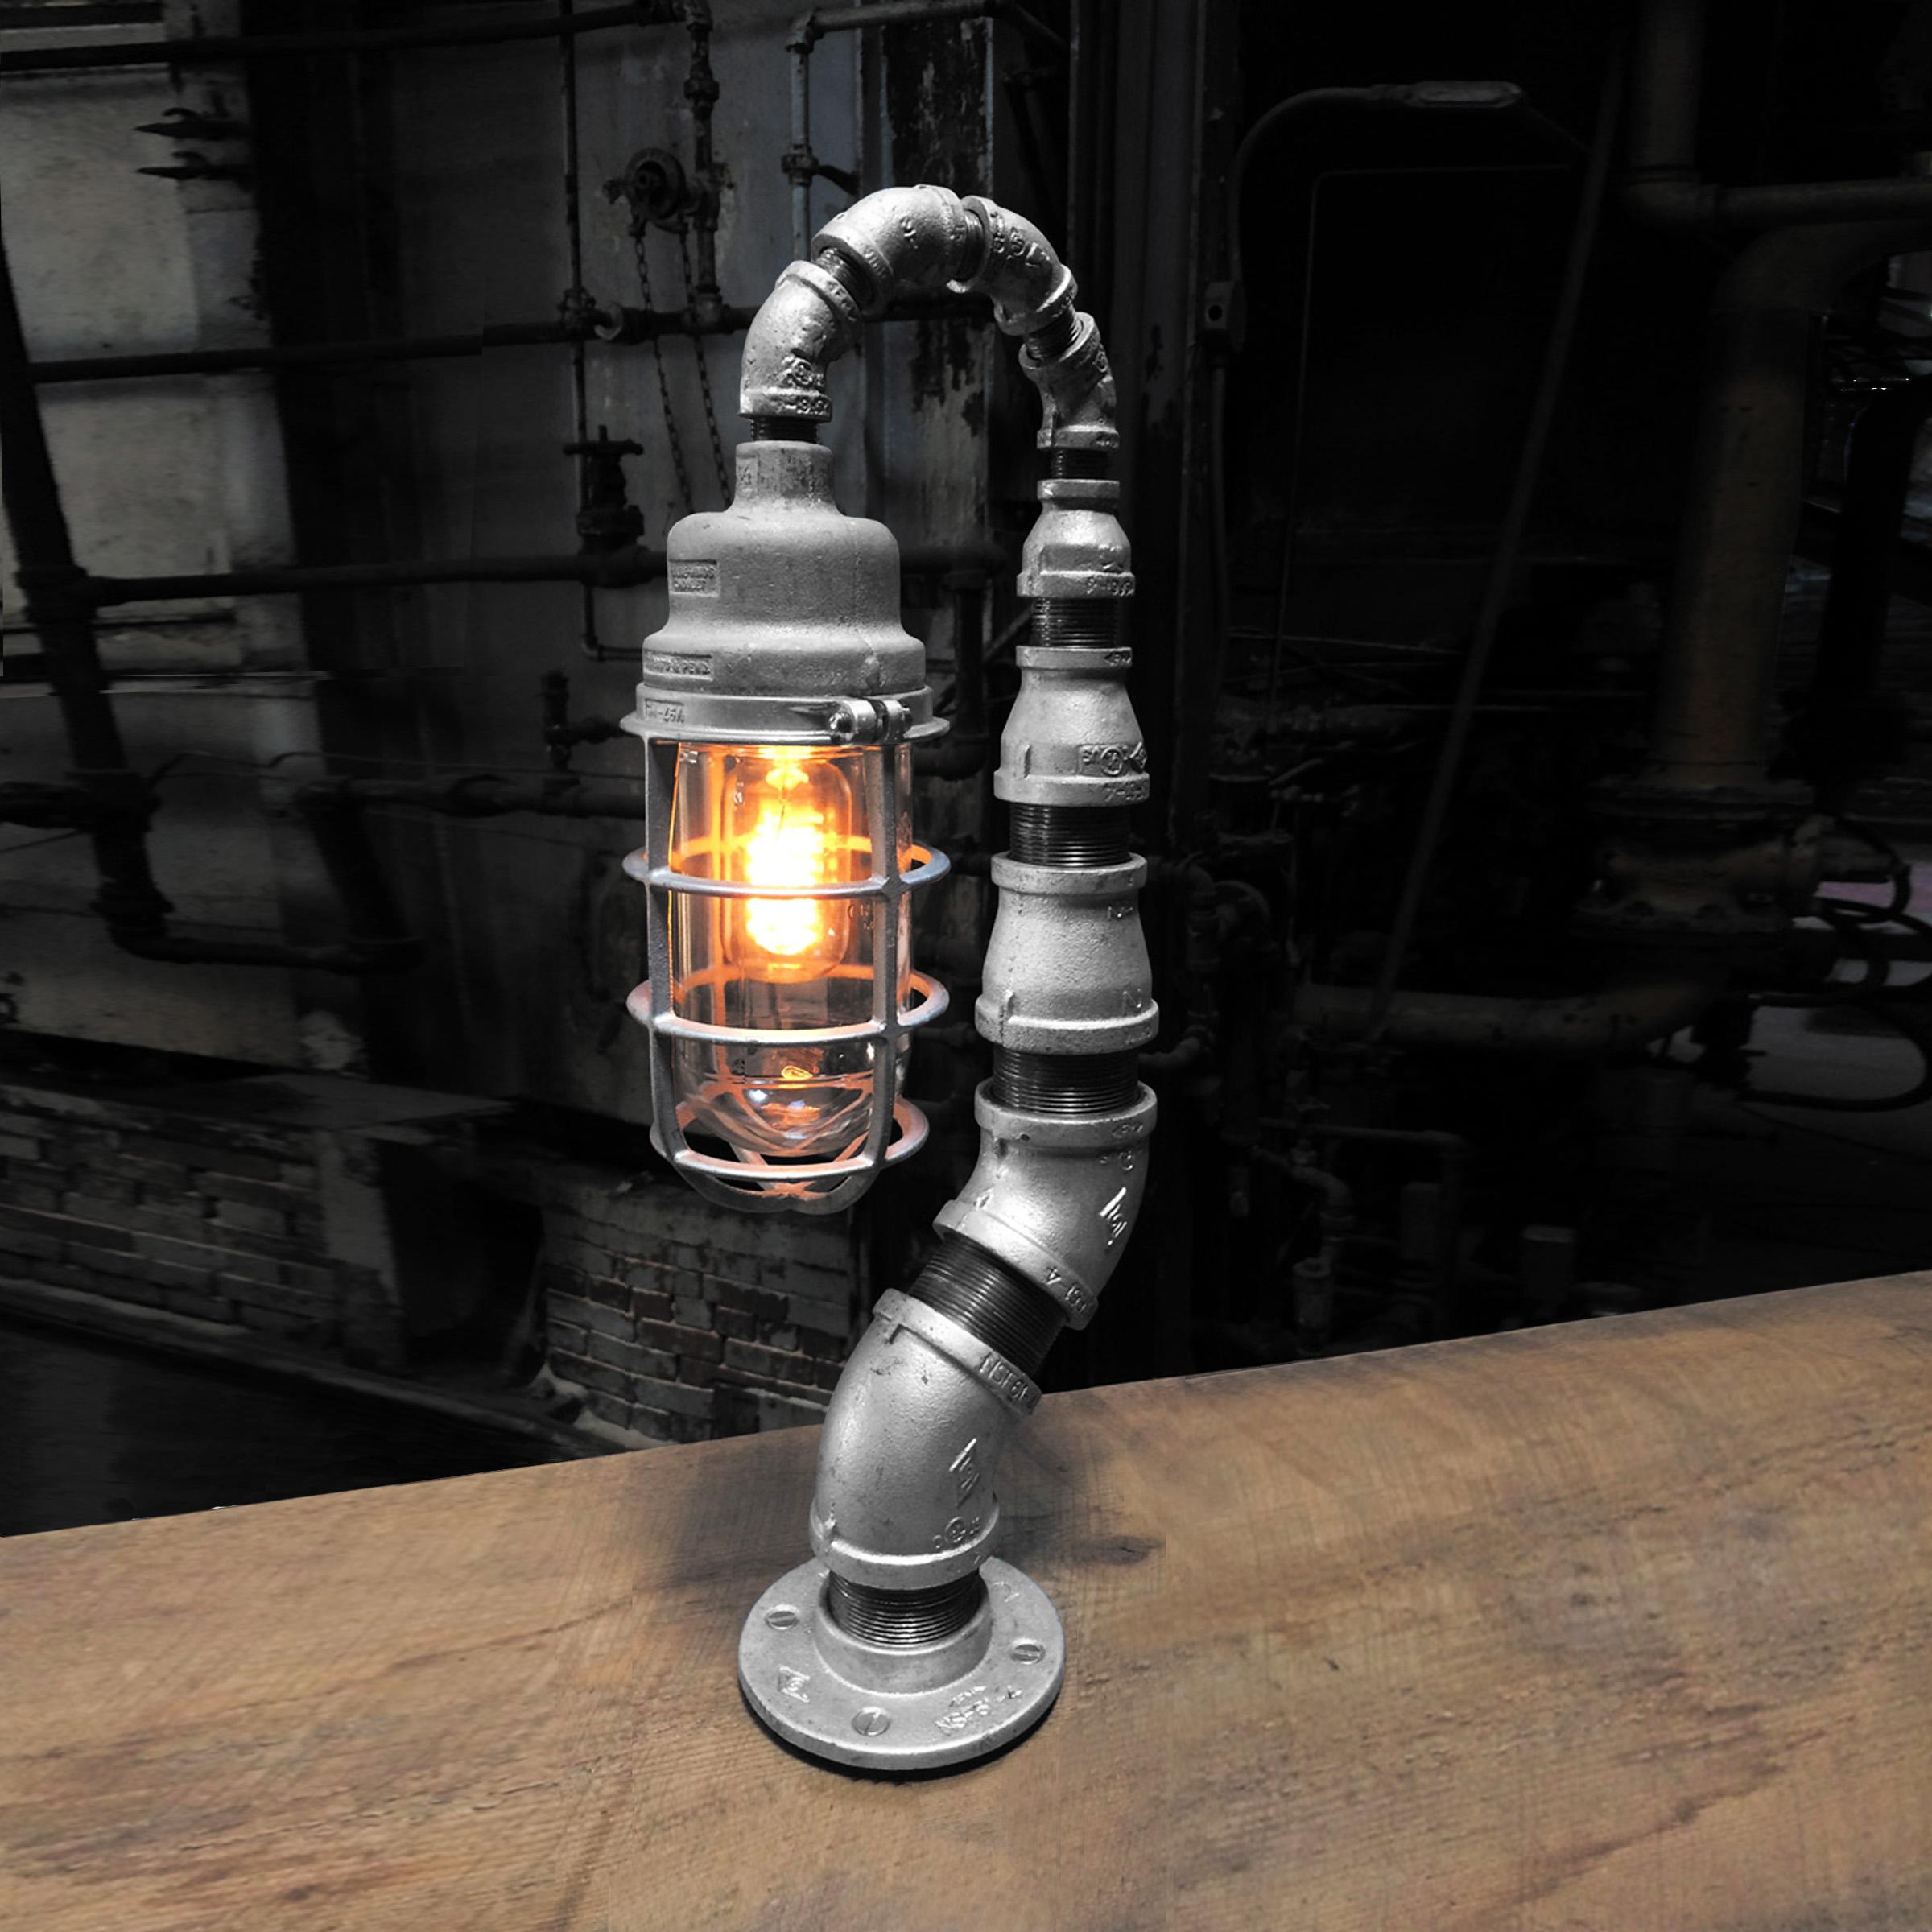 Tall and slender with a modest footprint, The Forbidden Fruit industrial table lamp is the perfect addition to your industrial decor and easily turns a lonely bedside table or end table into an intriguing and interesting space.  The antique Crouse